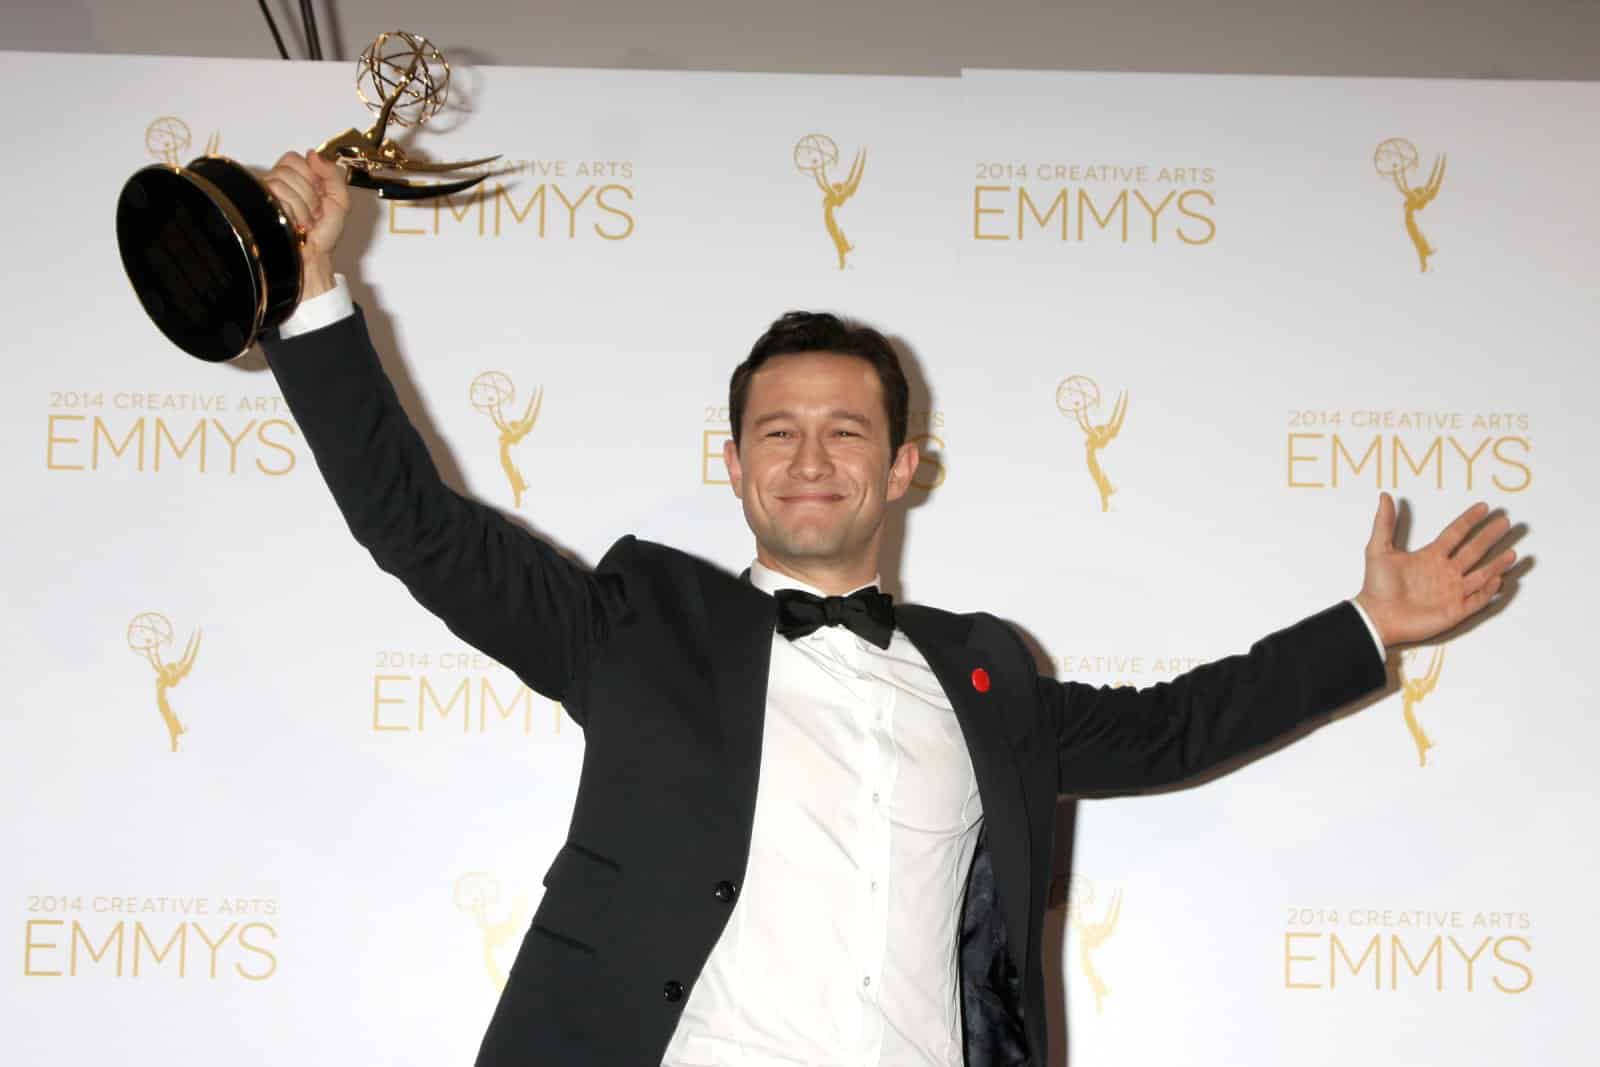 <p><span>Through various projects, including a video essay in 2014, Gordon-Levitt has explored masculinity and feminism, encouraging men to engage with and support feminist principles.</span></p>